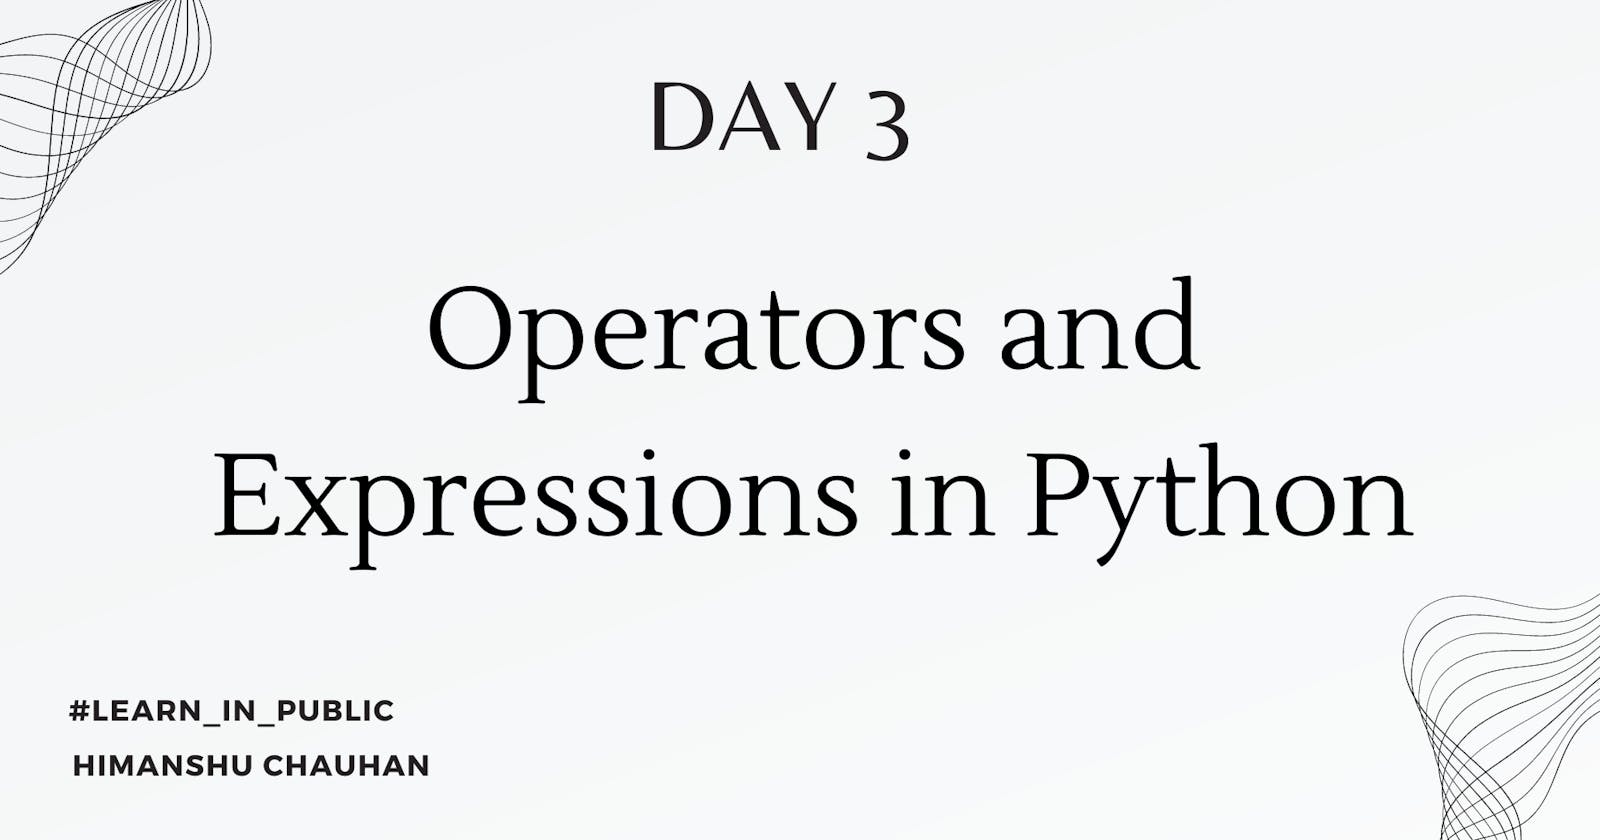 Day 3: Operators and Expressions in python